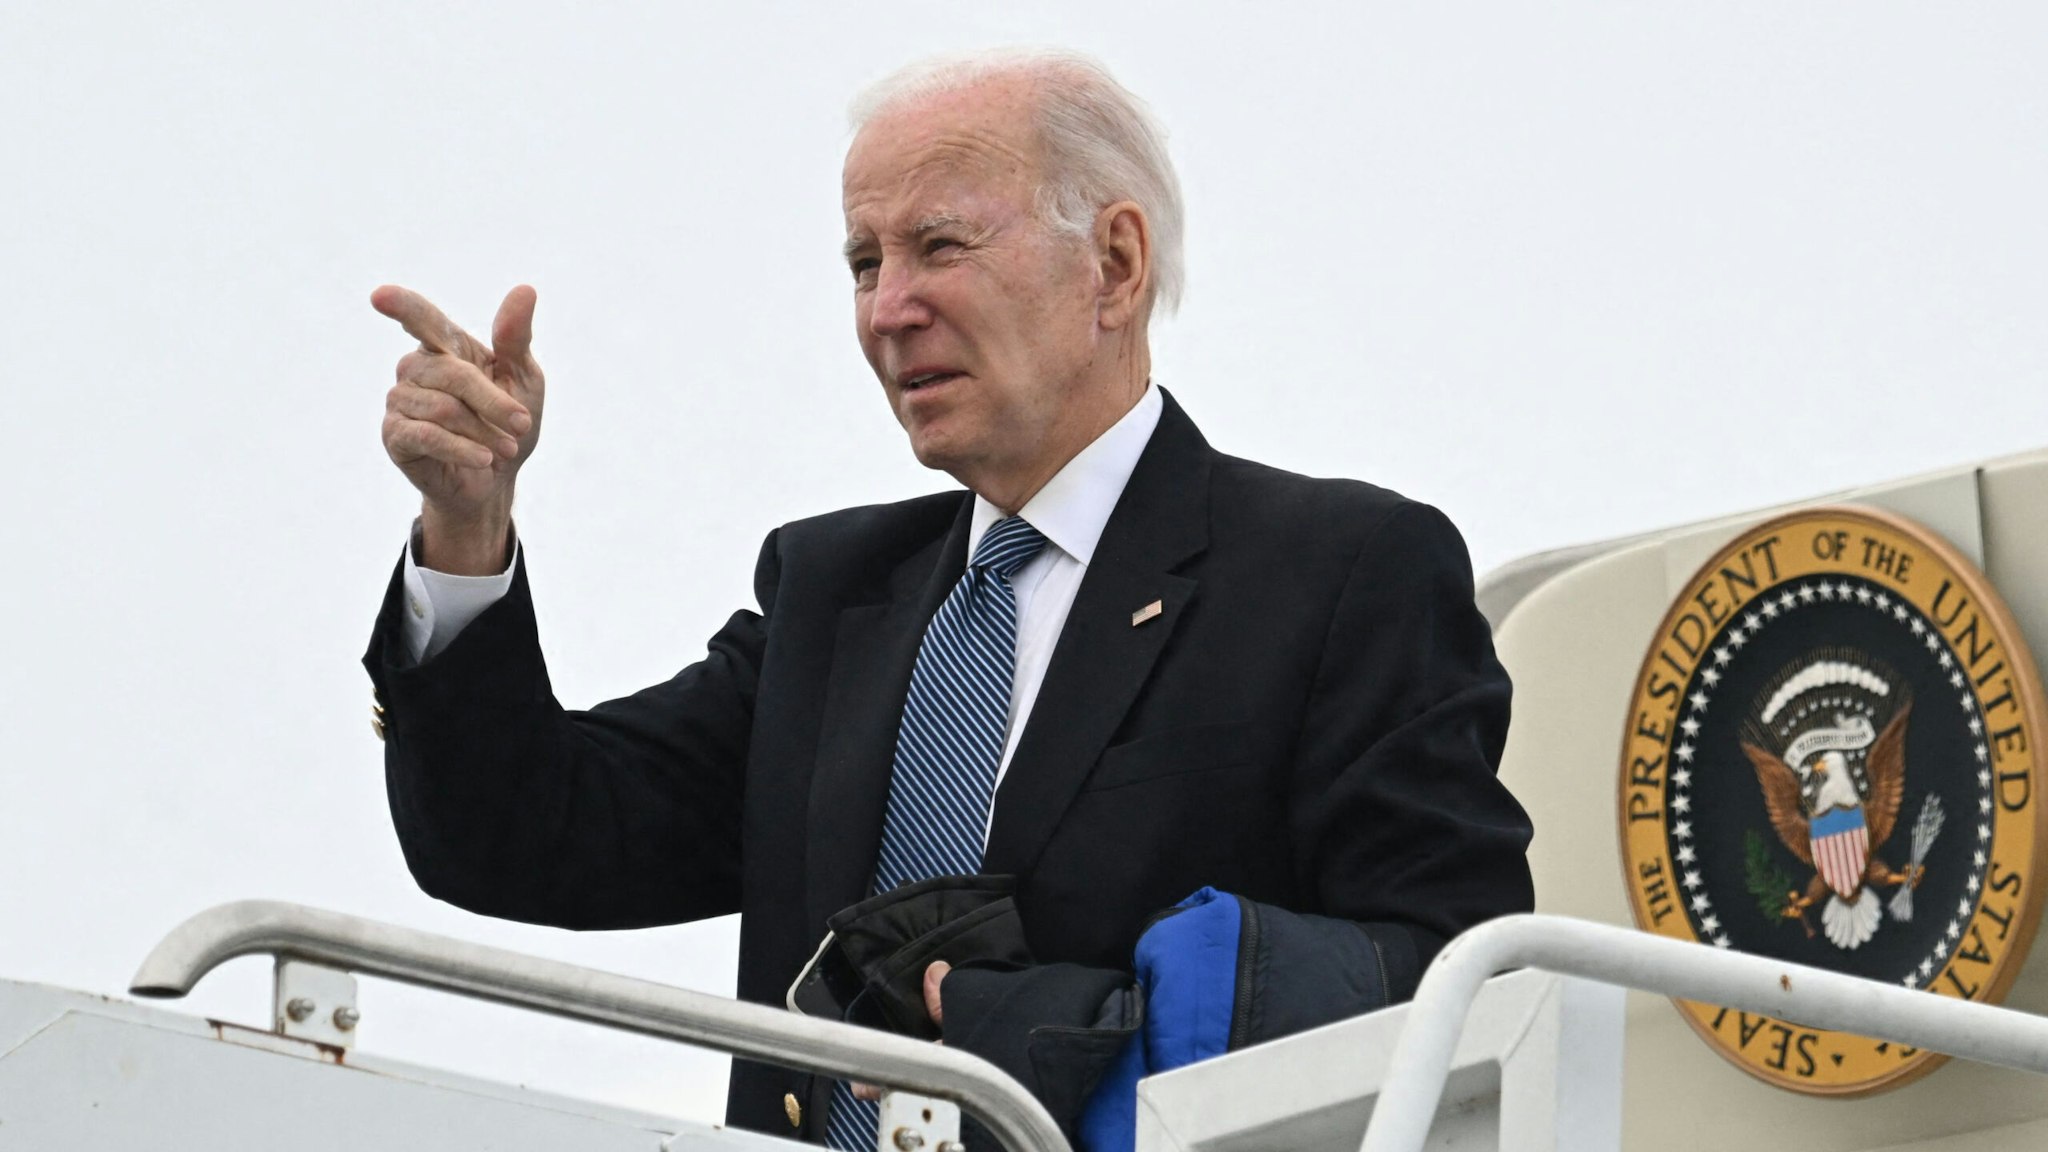 US President Joe Biden boards Air Force One at Hancock Field Air National Guard Base in Syracuse, New York, on February 4, 2023. - President Biden is headed to the Camp David presidential retreat in Maryland.